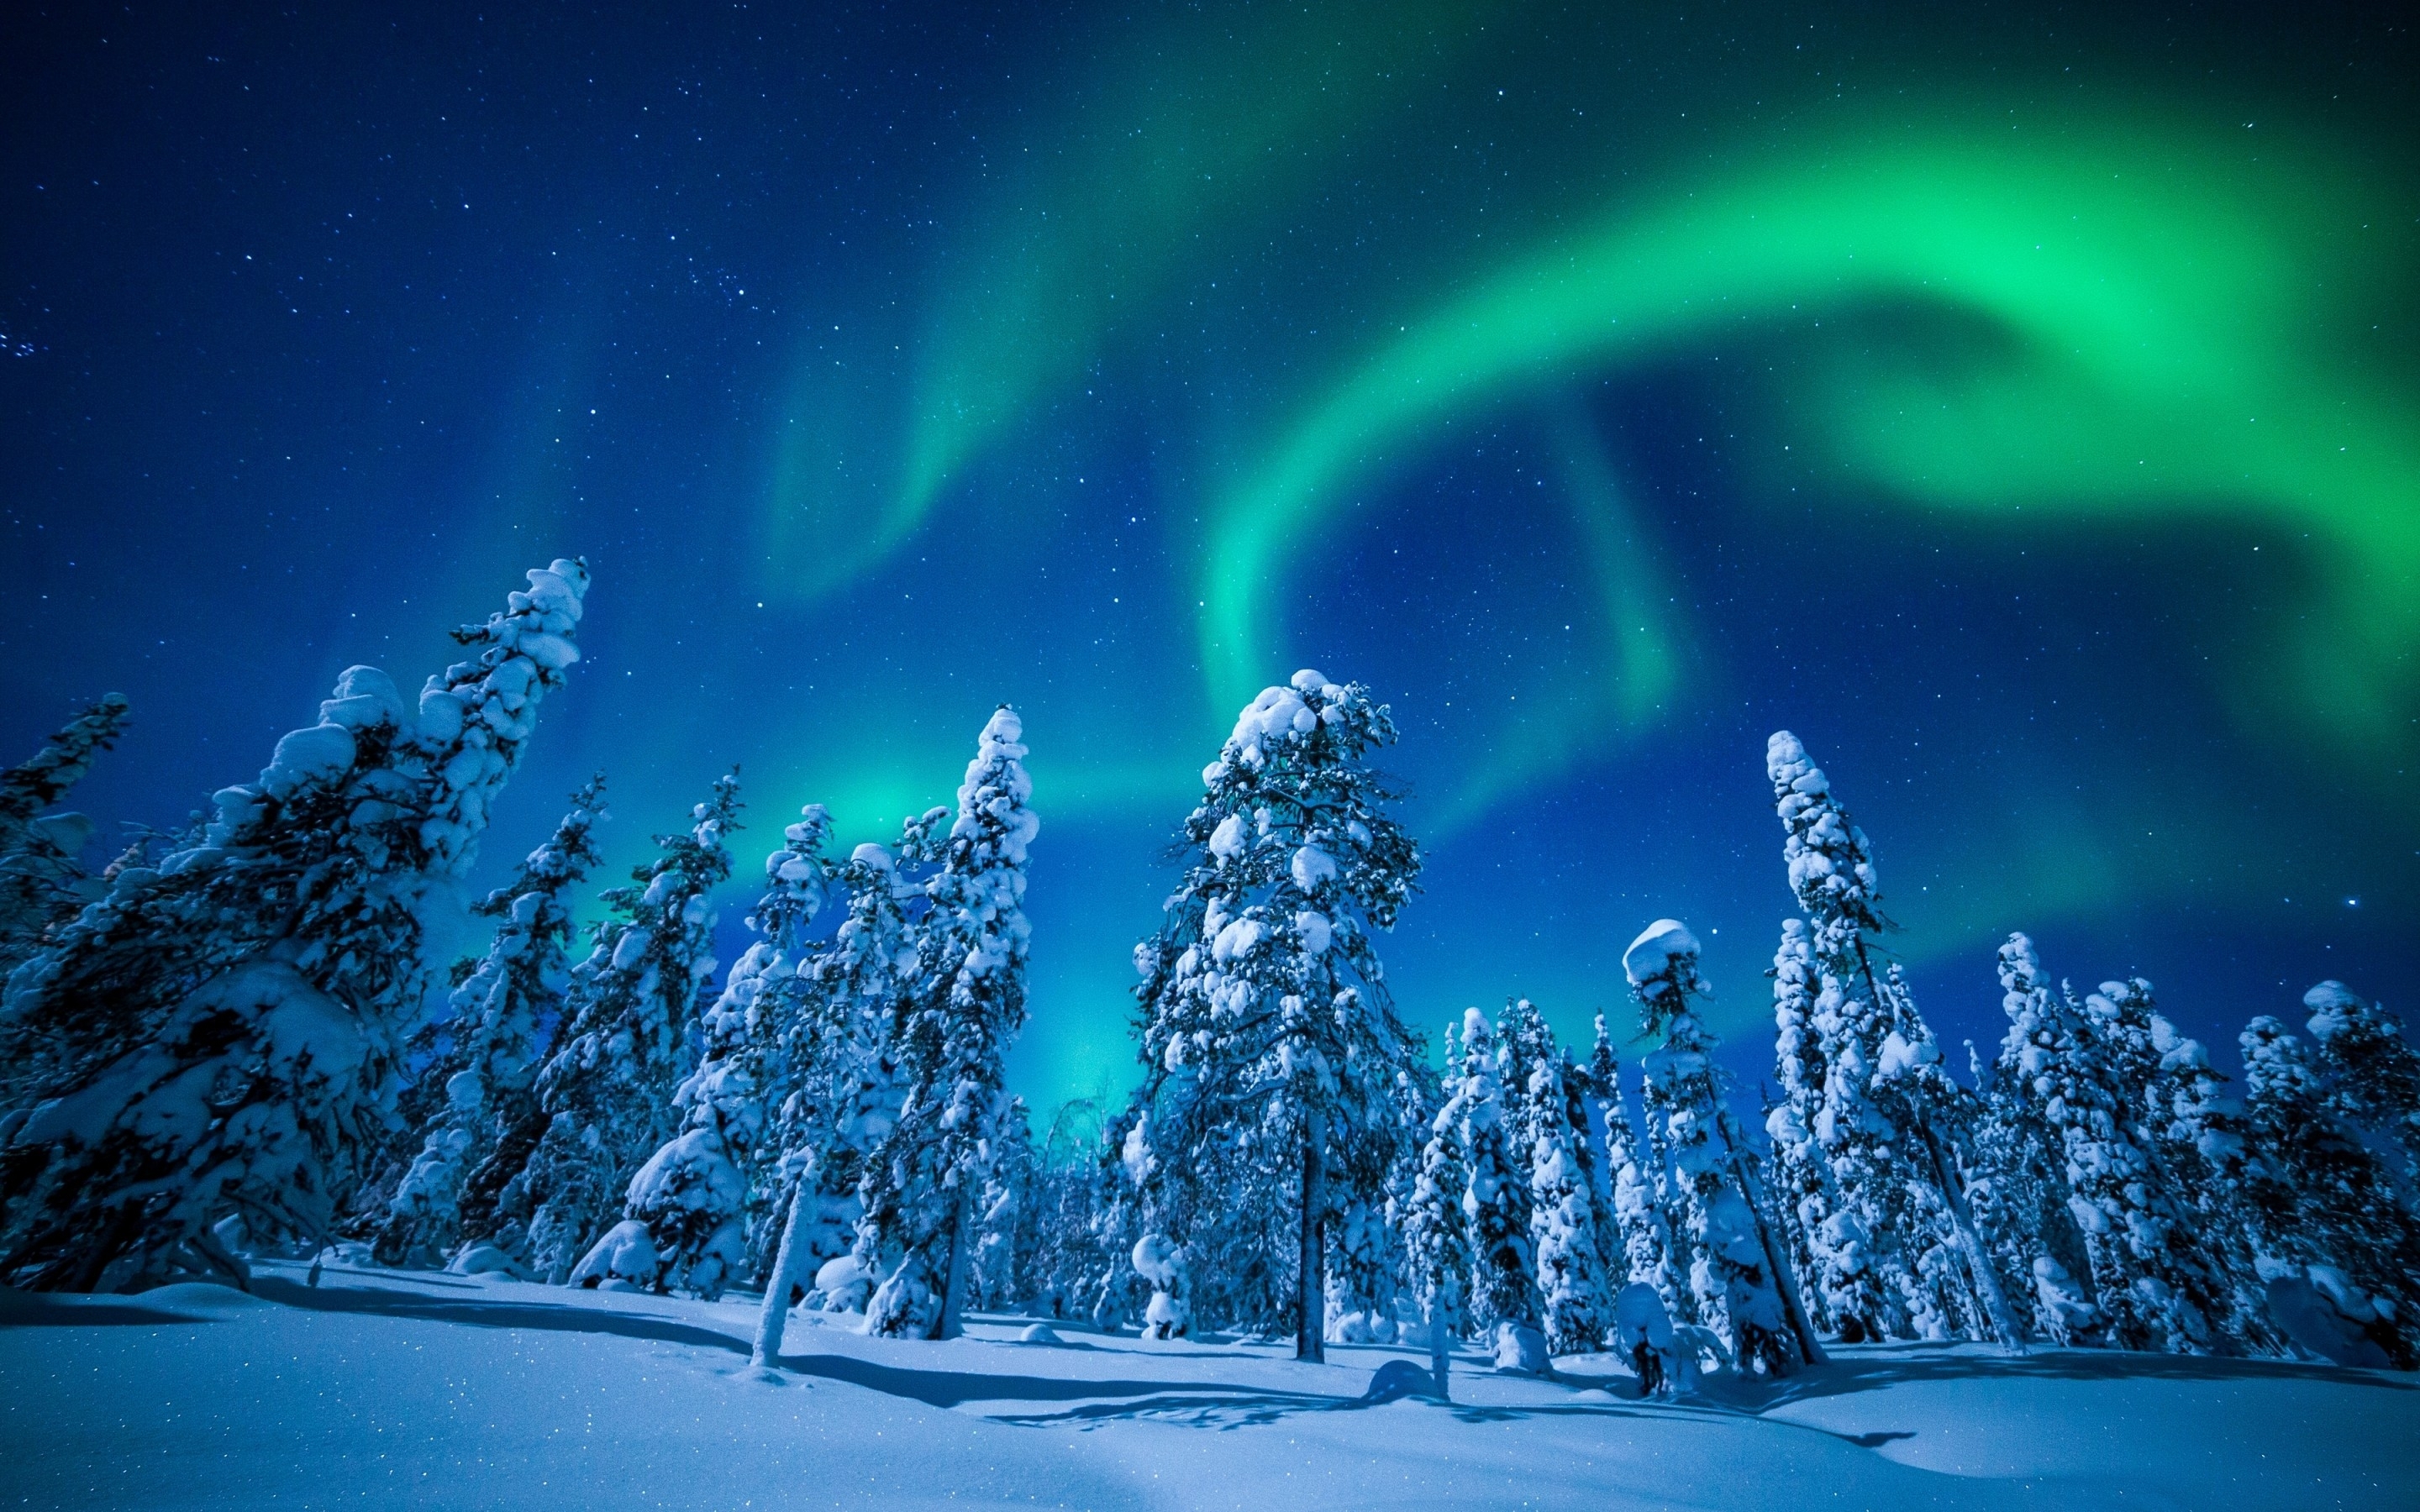 wallpaper forest, winter, frosted trees, aurora borealis, northern